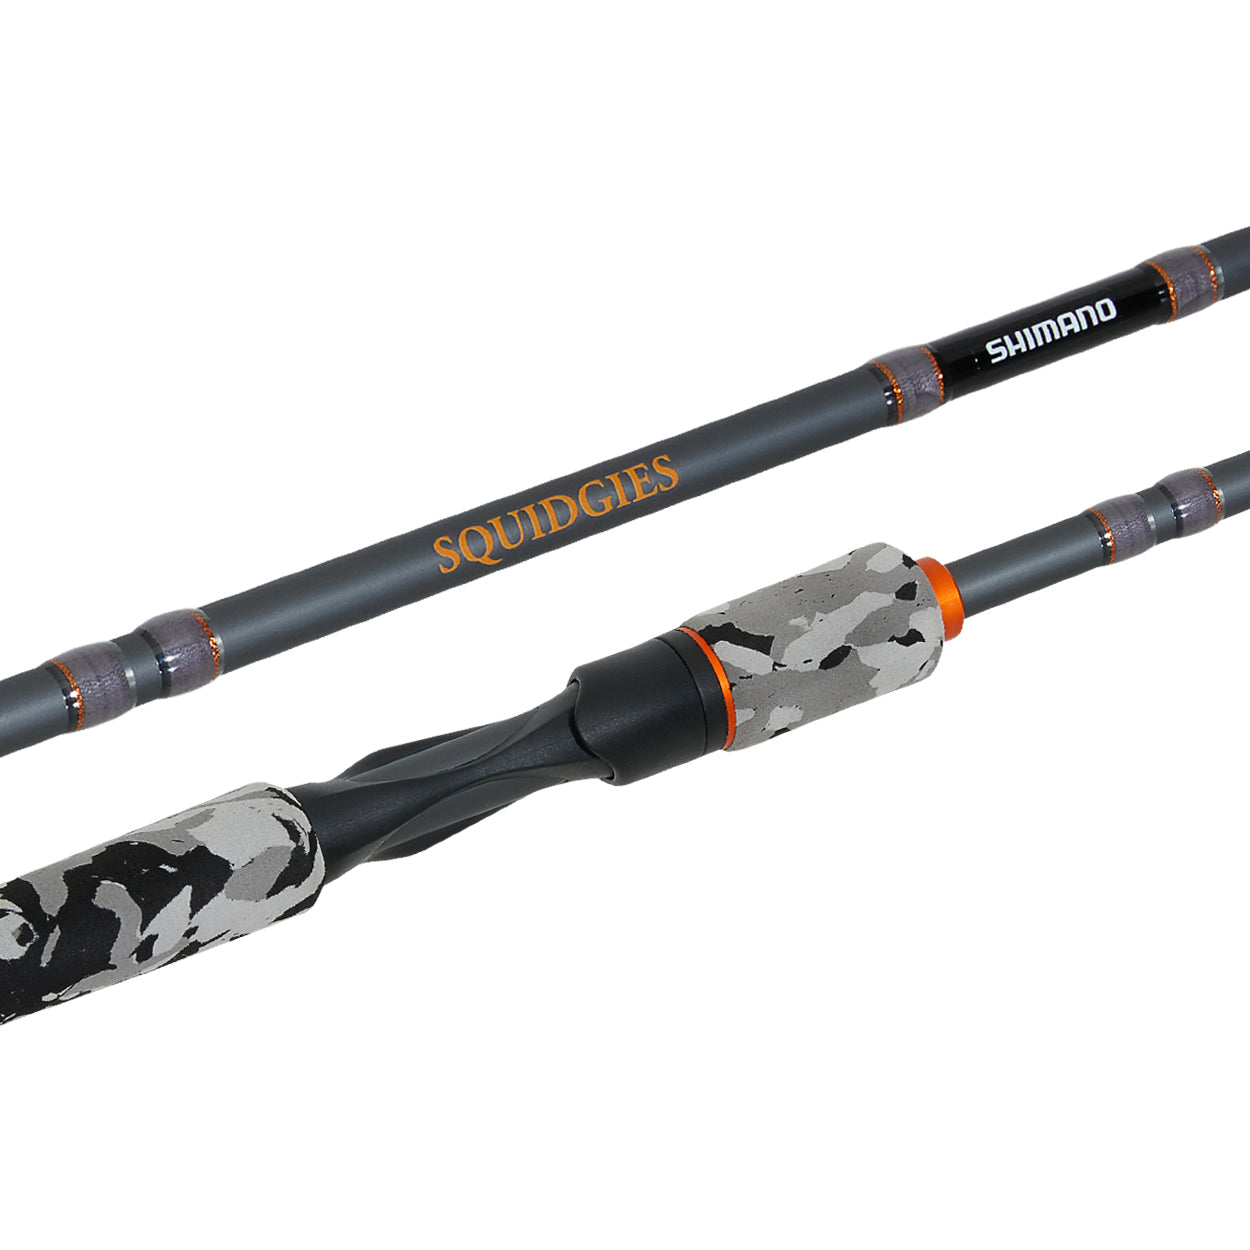 Shimano Squidgies Spin Rod